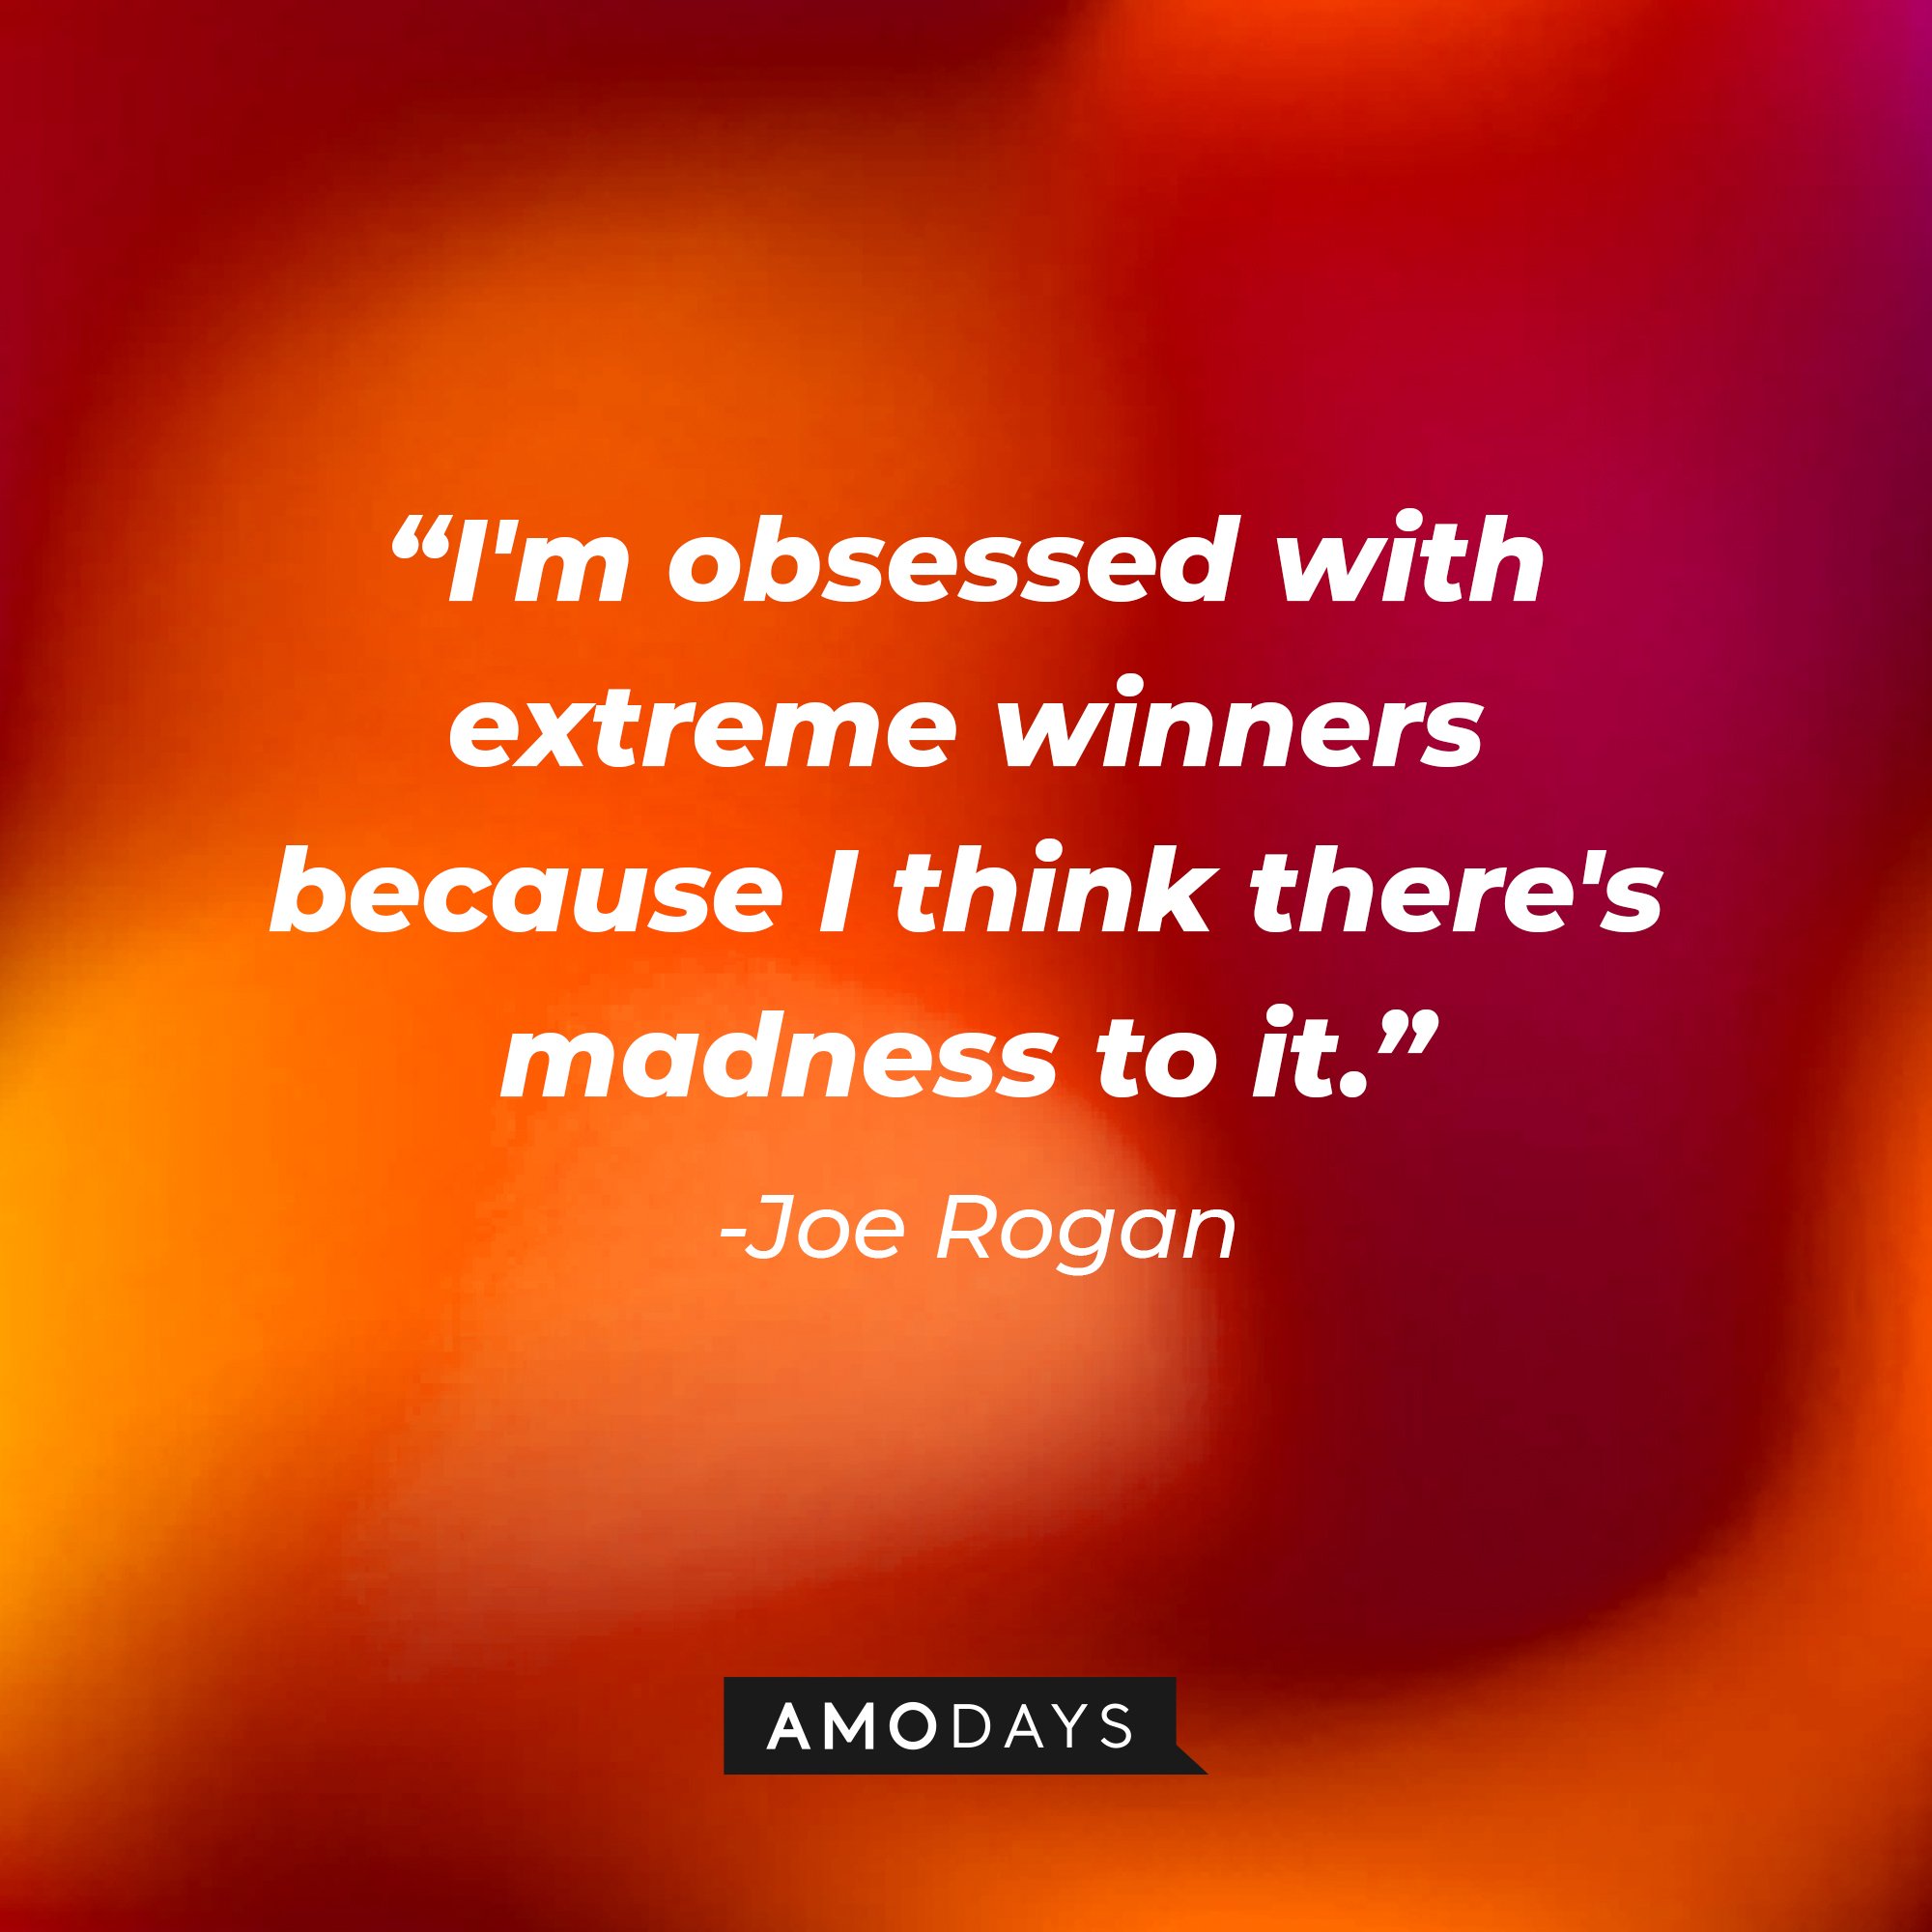 Joe Rogan's quote: "I'm obsessed with extreme winners because I think there's madness to it."  | Image: AmoDays